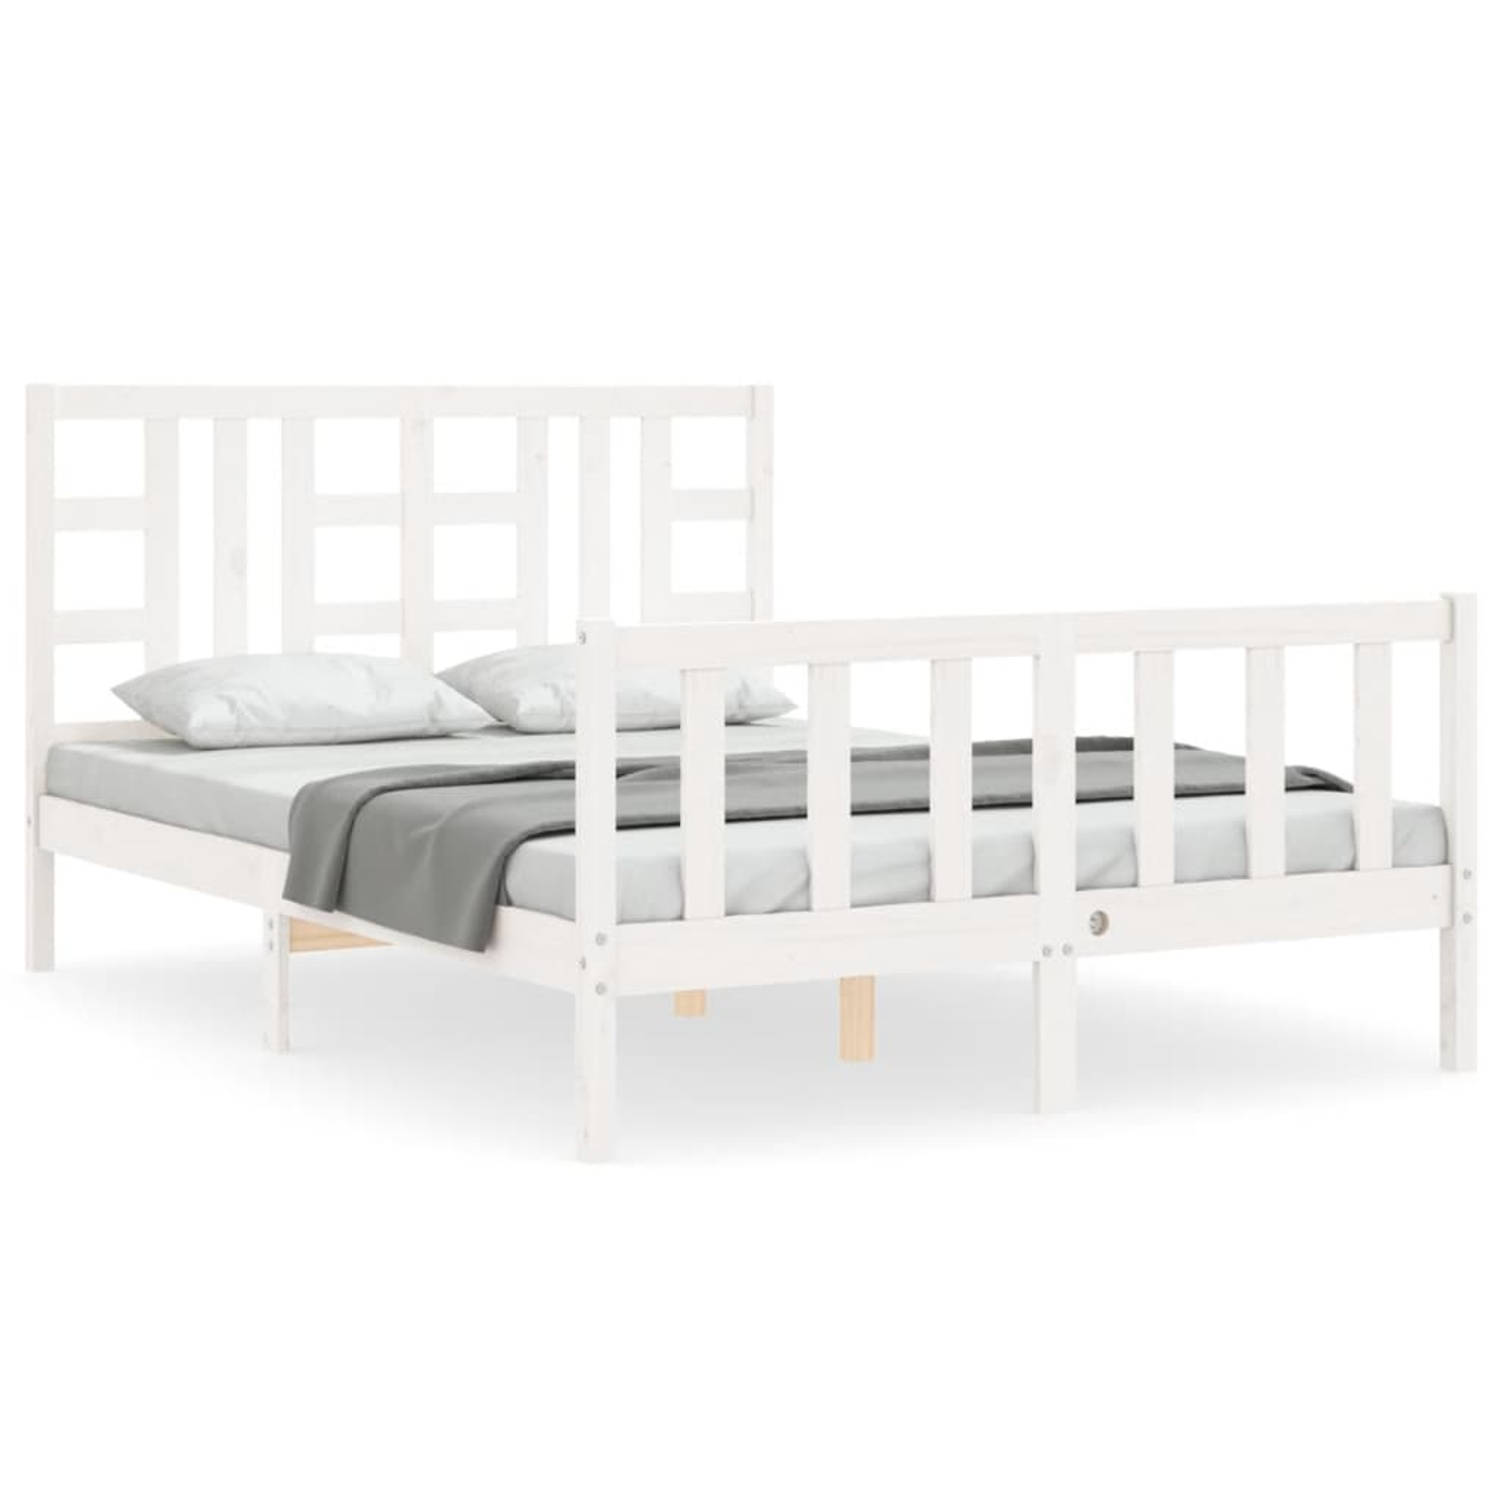 The Living Store Bedframe - Massief grenenhout - 205.5 x 155.5 x 100 cm - Wit